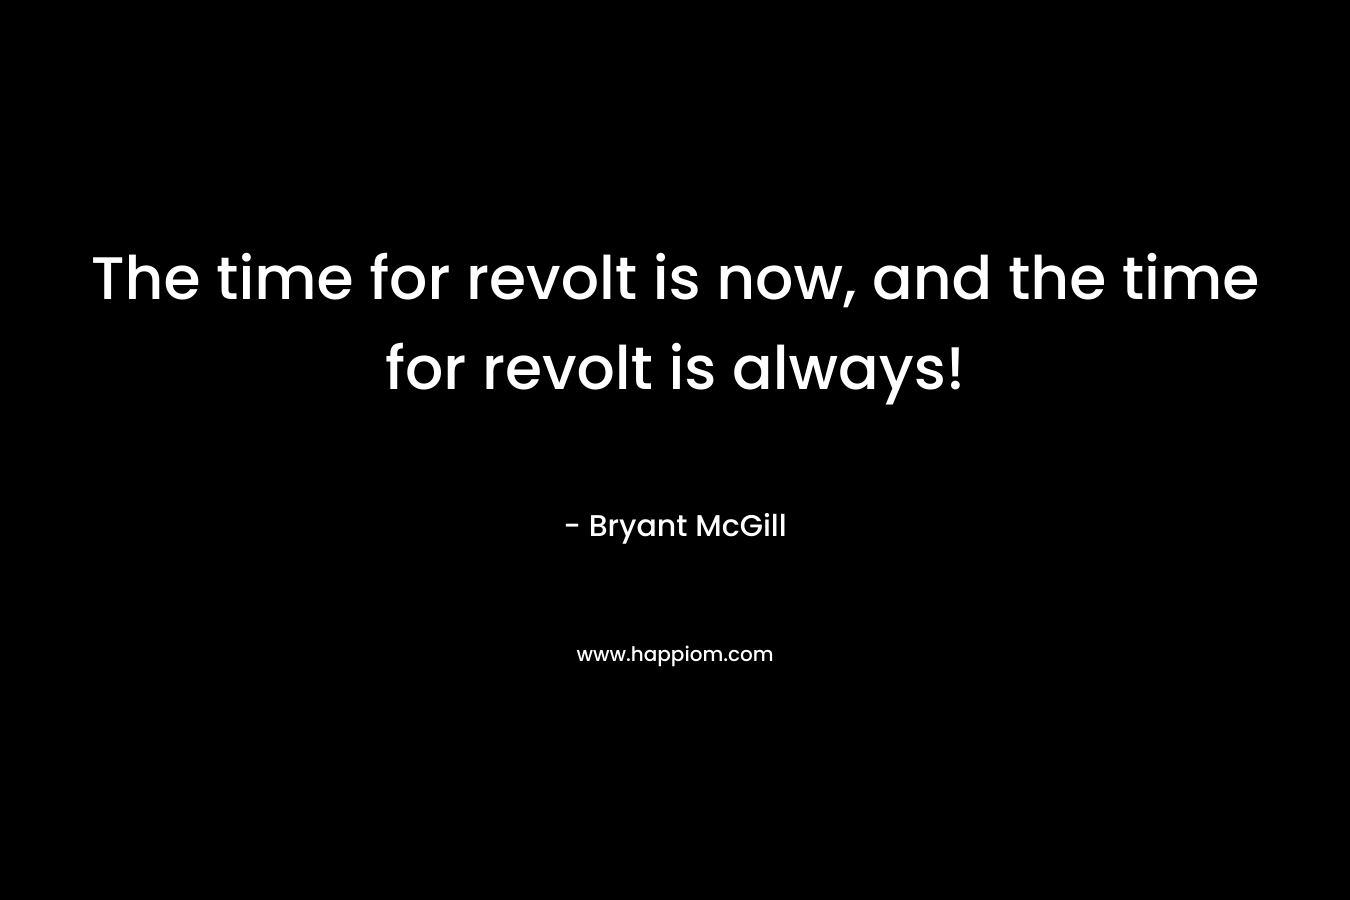 The time for revolt is now, and the time for revolt is always! – Bryant McGill